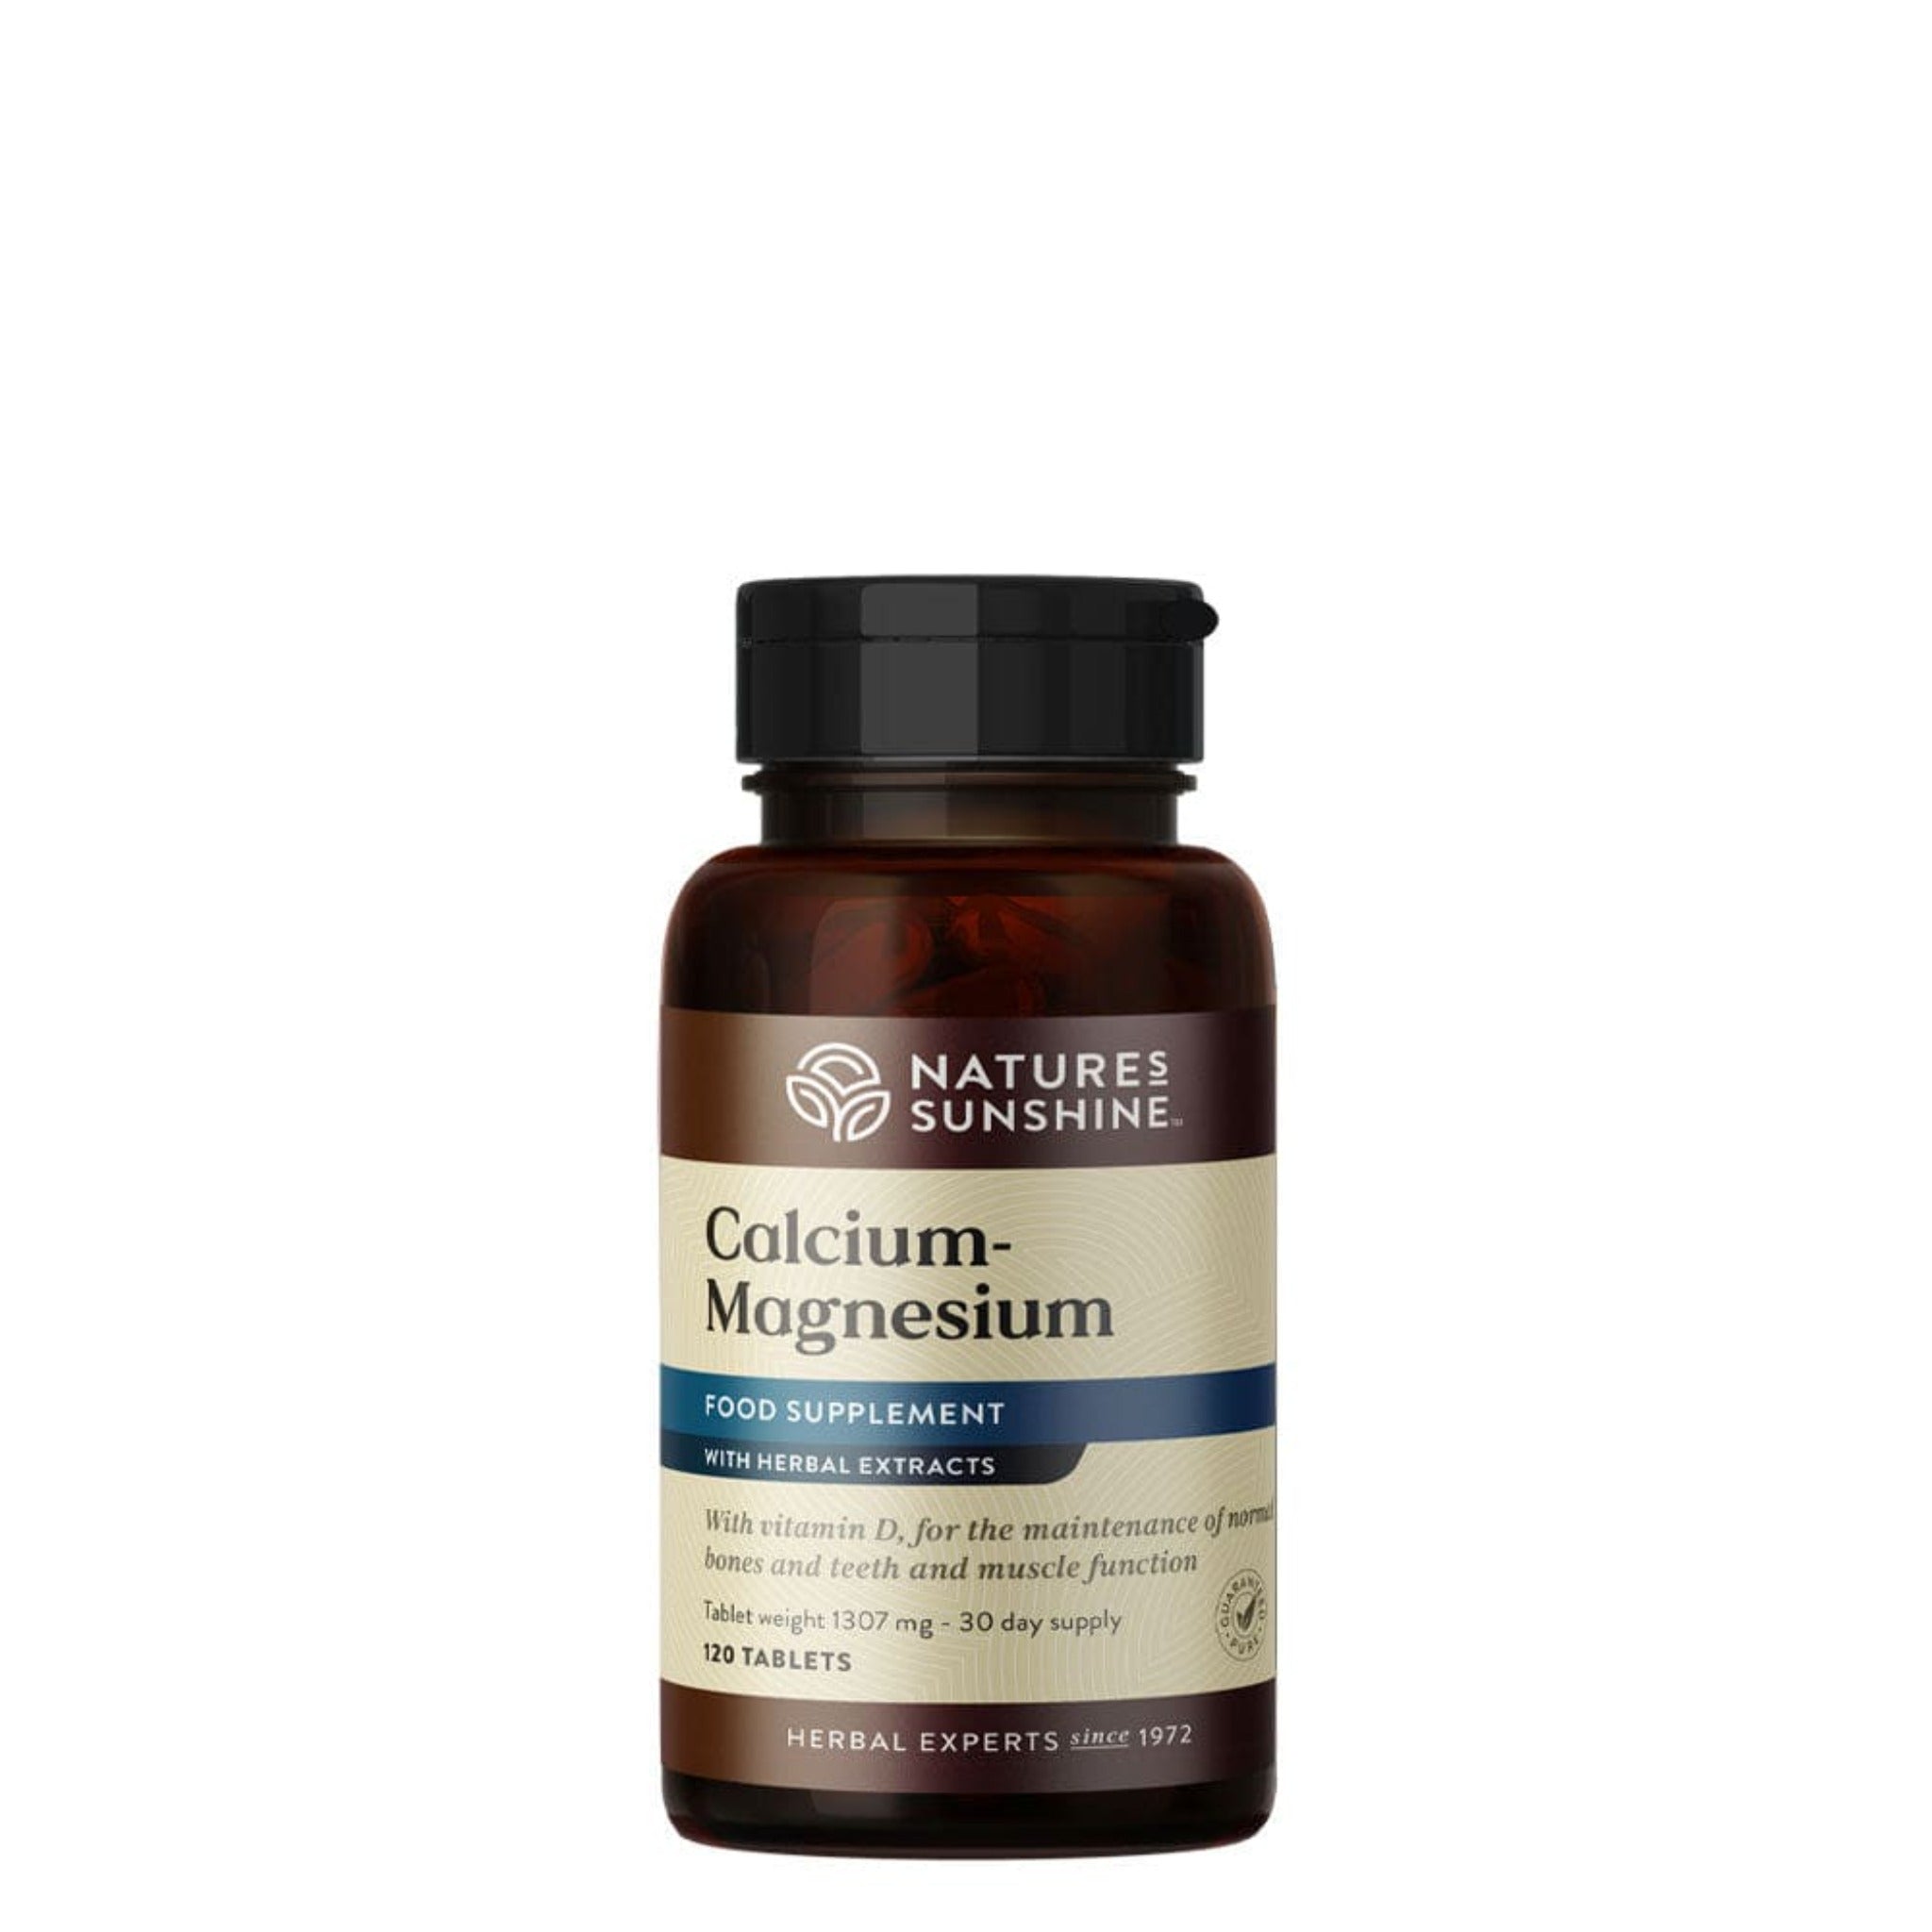 Dark amber bottle of Nature's Sunshine Calcium-Magnesium supplement with vitamin D, containing 120 tablets for a 30-day supply.